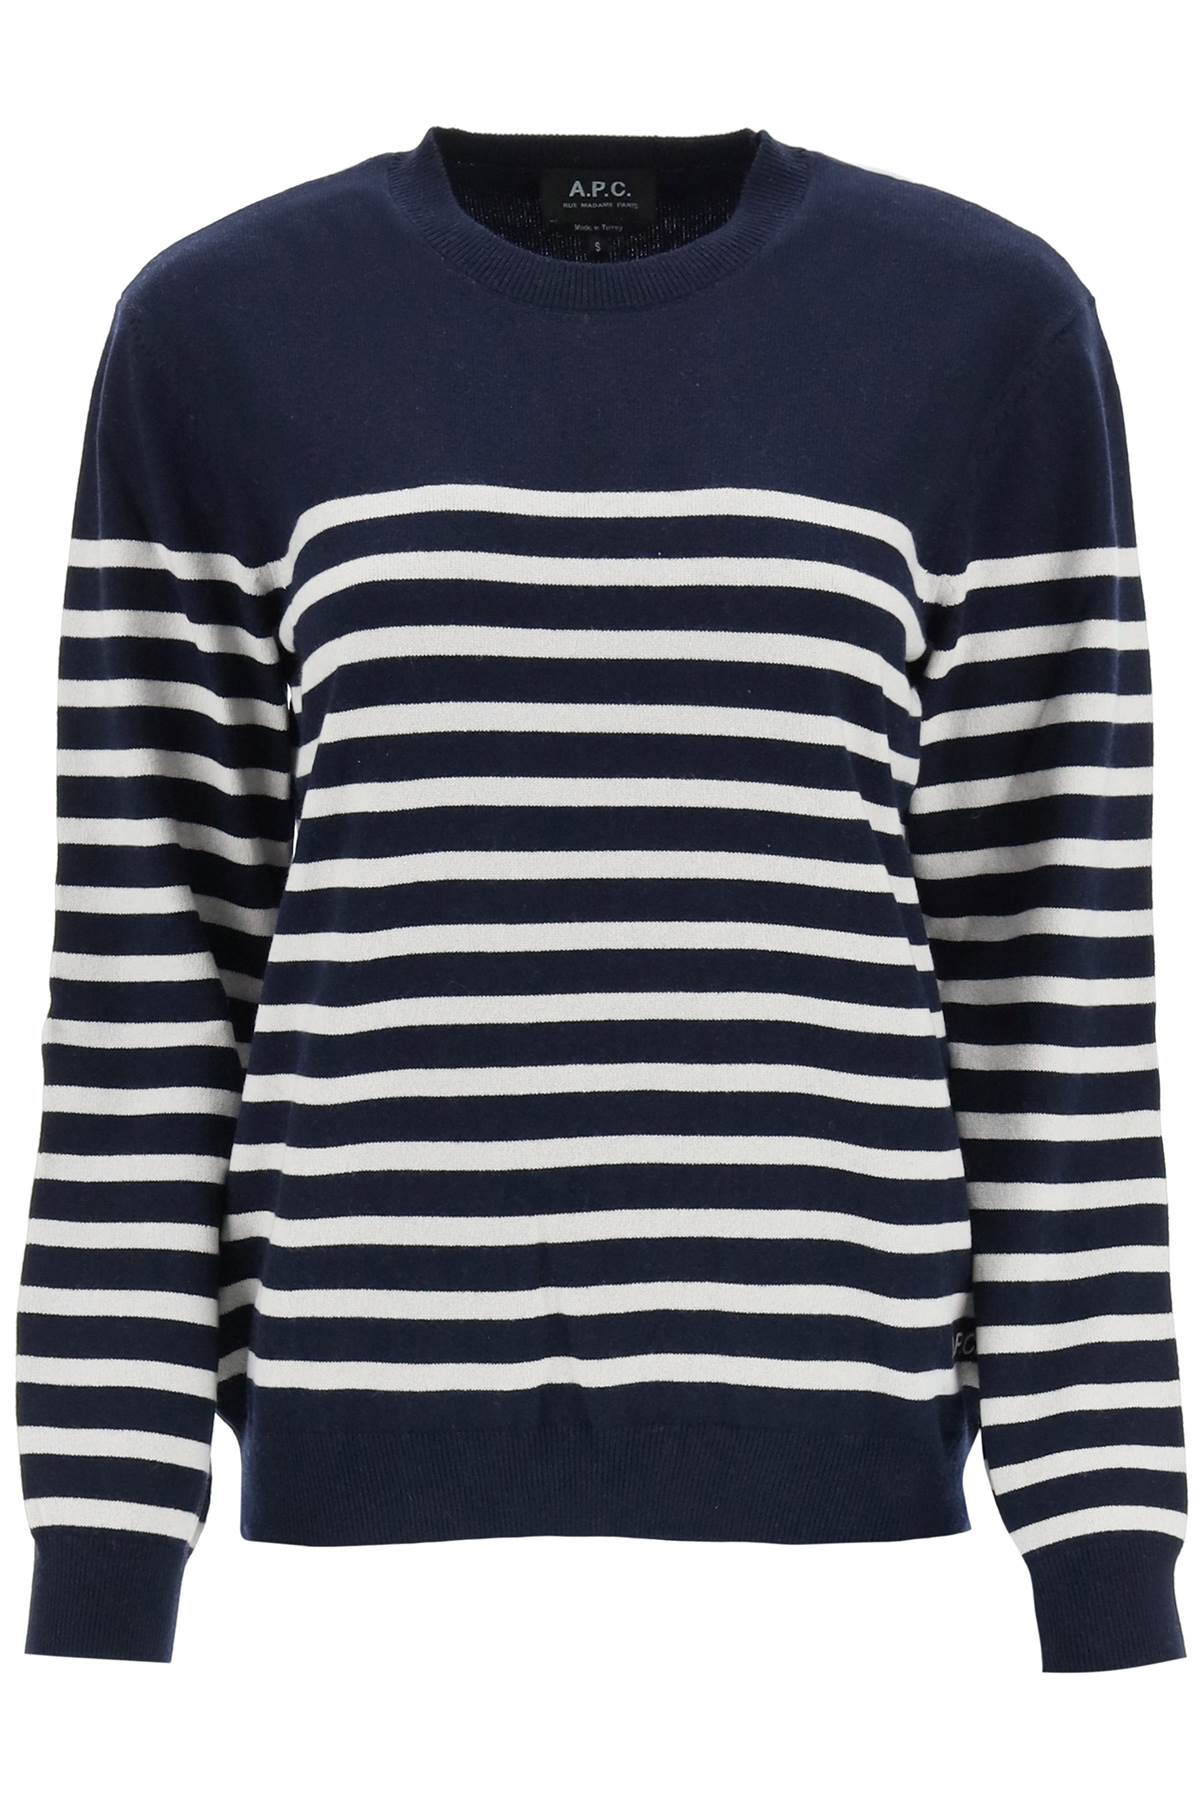 A.p.c. 'phoebe' striped cashmere and cotton sweater - Blue-clothing-A.P.C.-Urbanheer